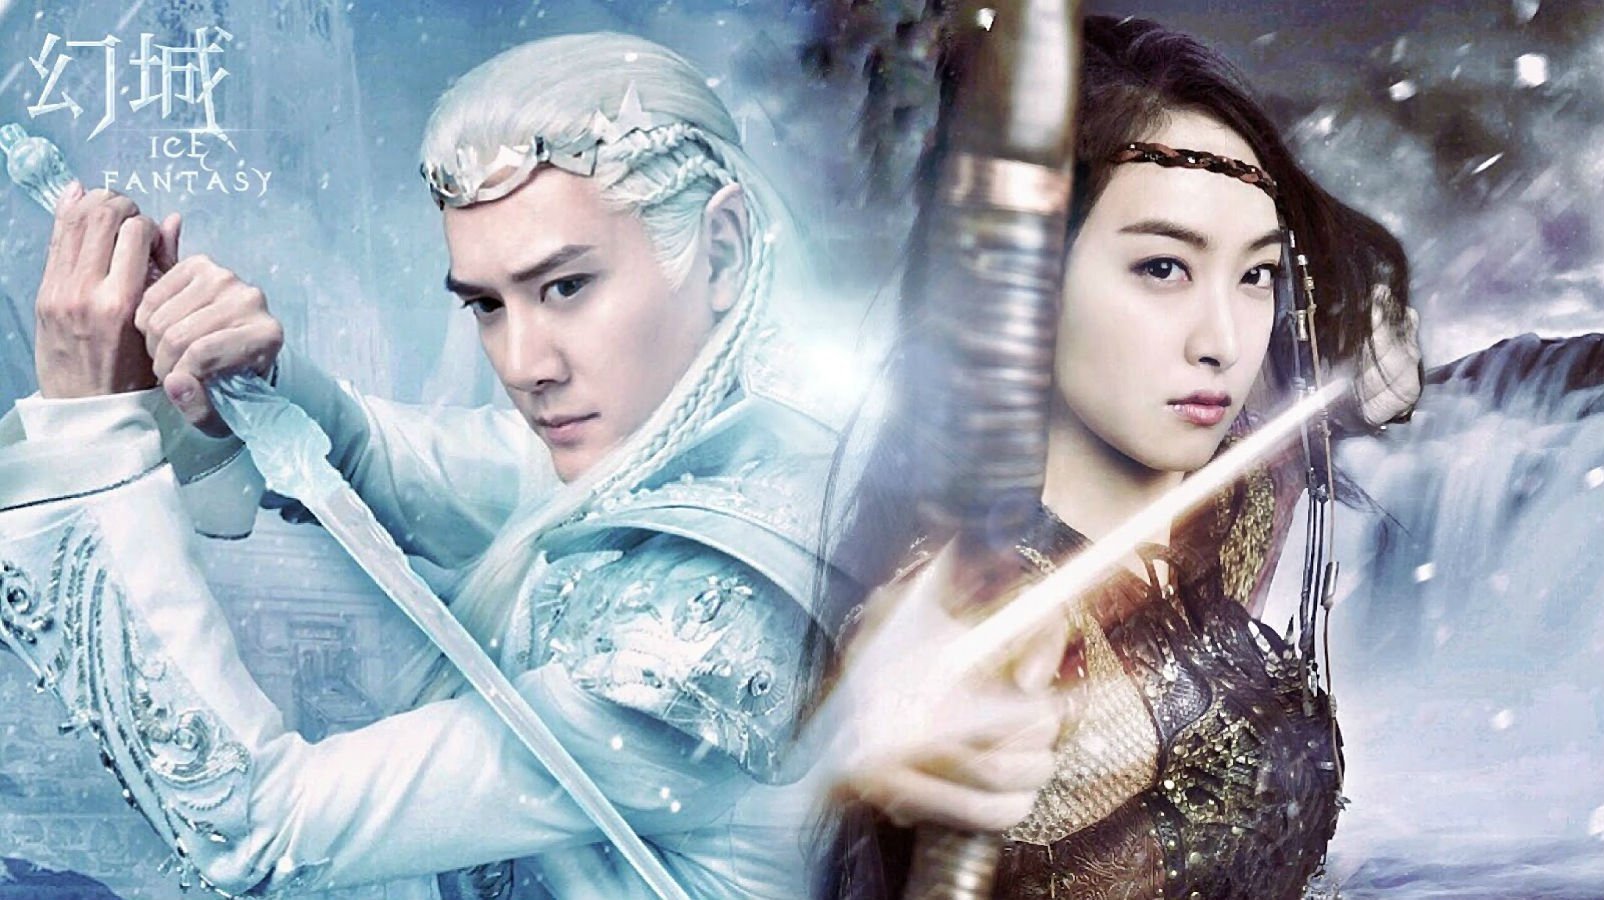 ice, Fantasy, Huancheng, Movie, Asian, Oriental, Action, Fighting, Warrior, Fantasy, Martial, Arts, Television, Series, Chinese, China, Romance, Drama, Supernatural, 1icef, Perfect Wallpaper